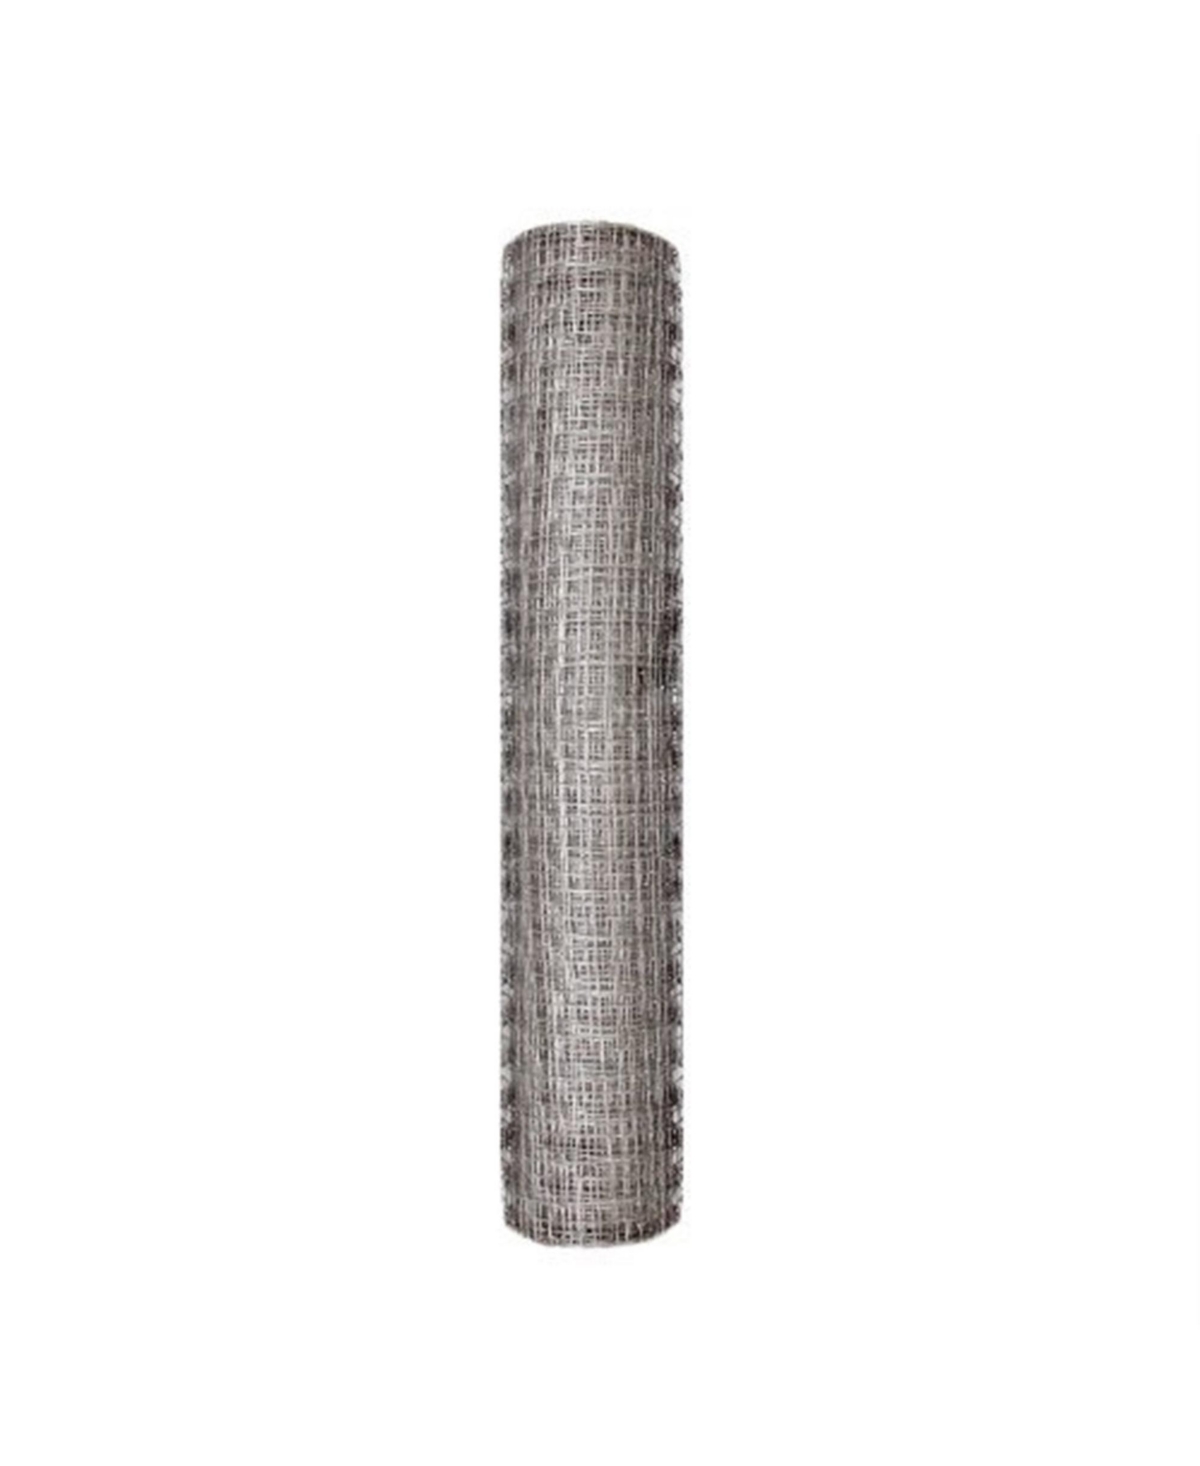 312450 50-Foot x 24-Inch Gray Plastic Poultry Netting With 1-Inch Openings - Silver